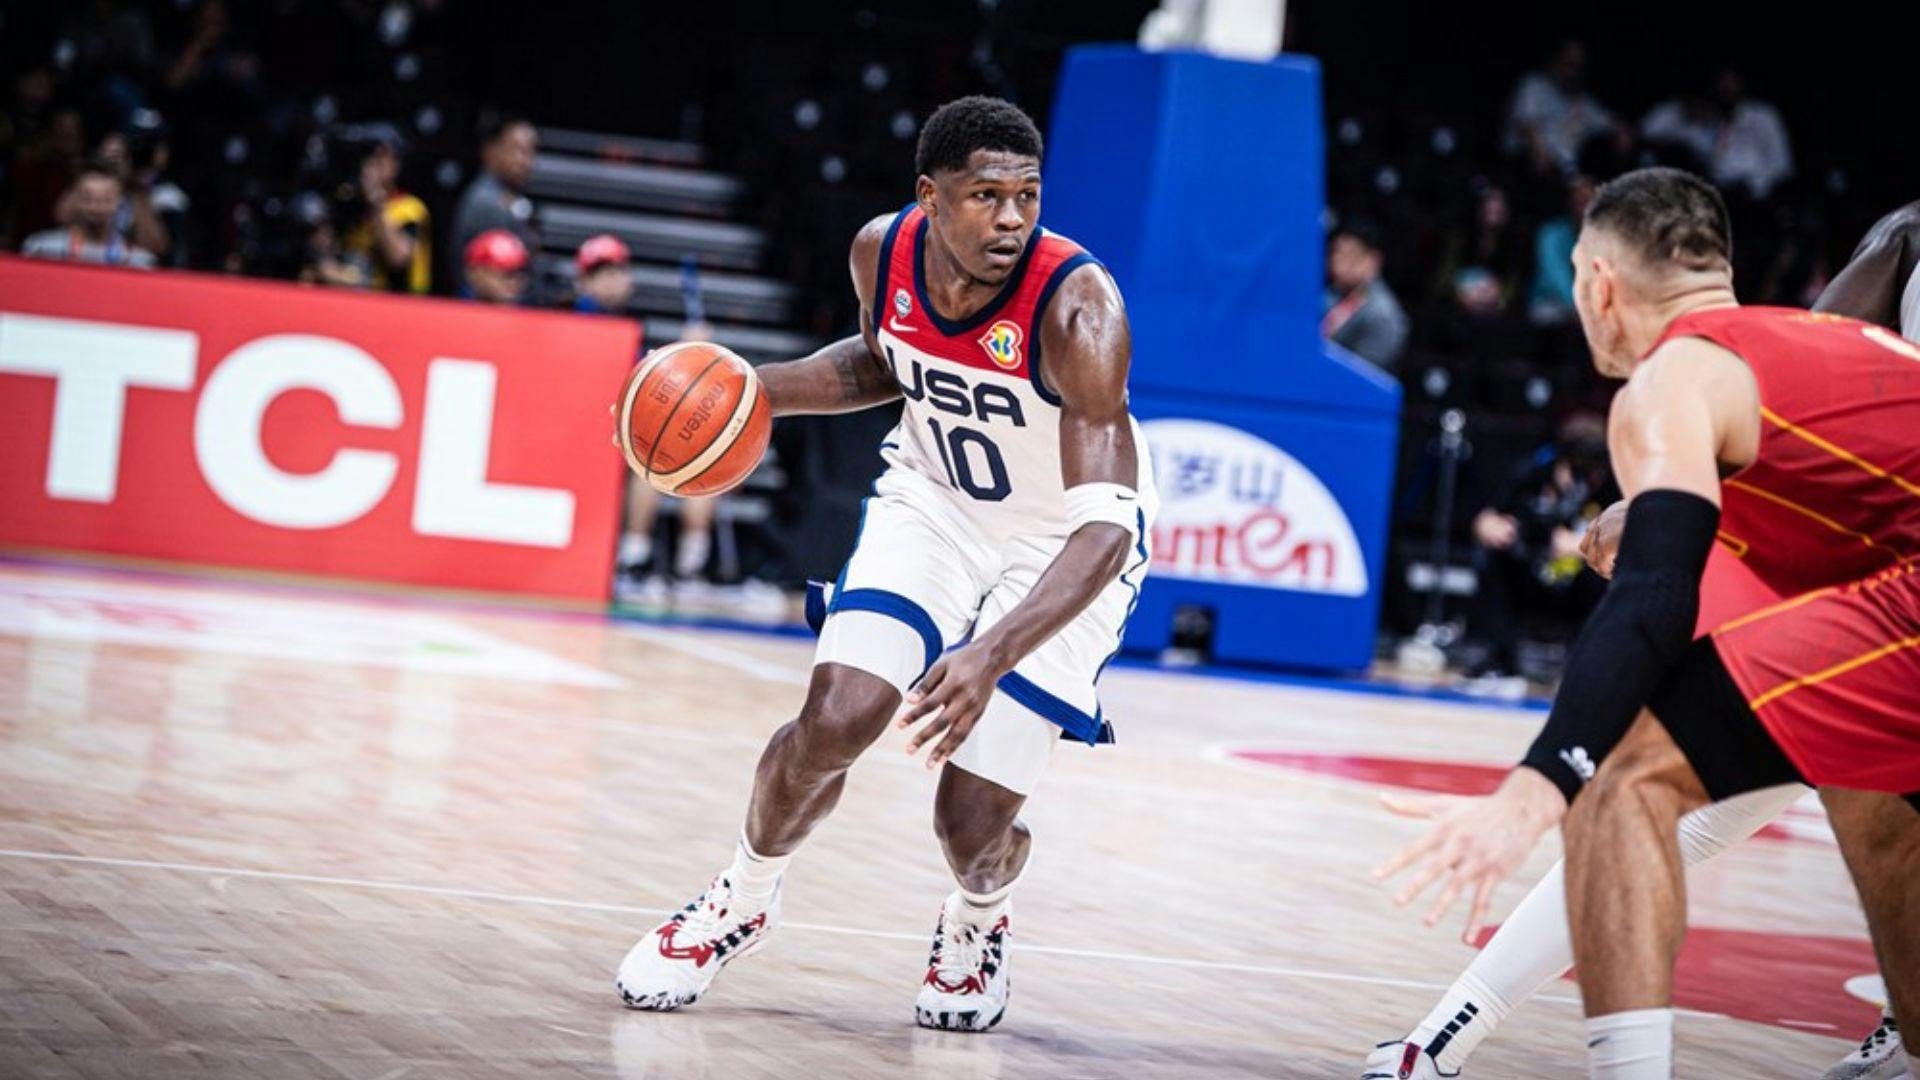 Passed: Team USA struggles early but aces first big test with win over Montenegro